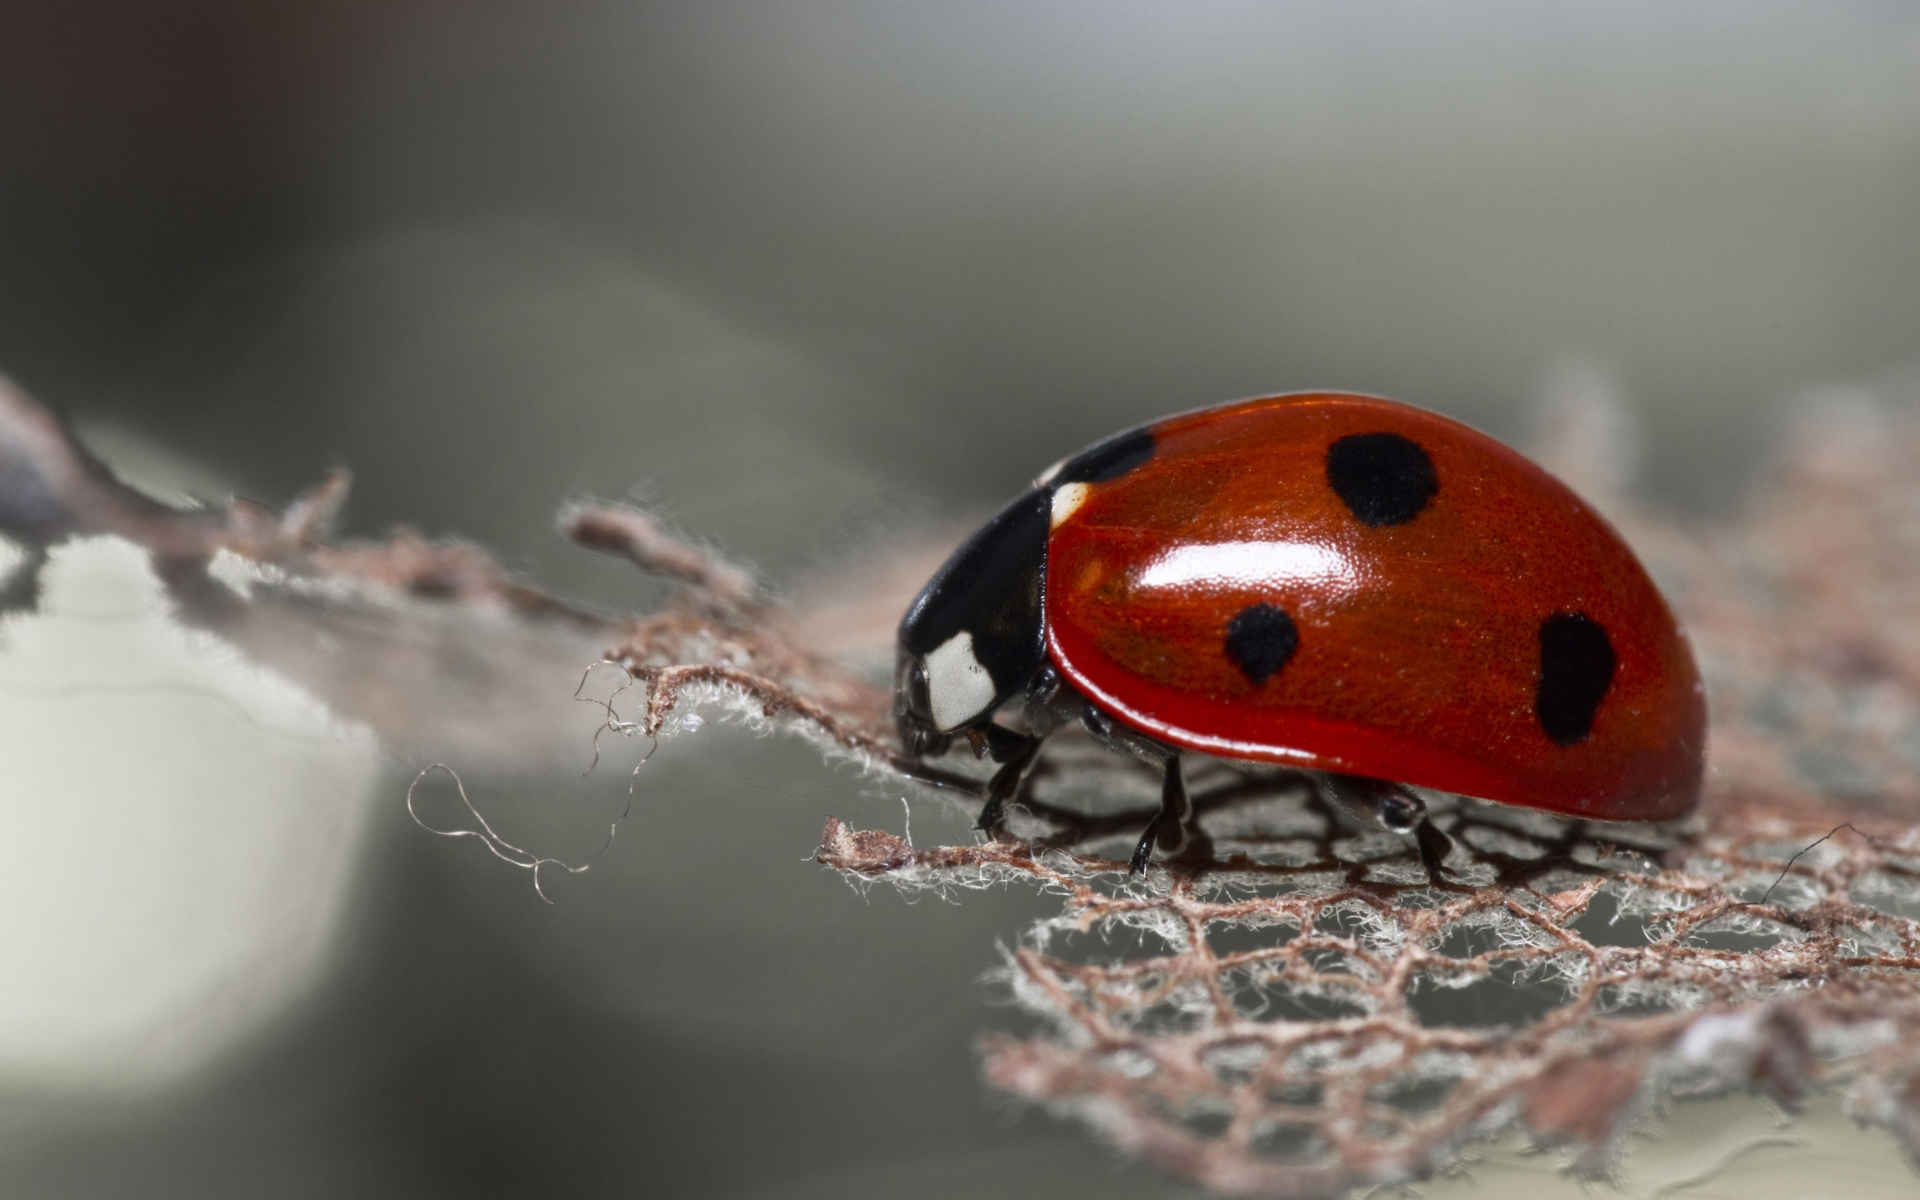 Wallpapers insect ladybug red on the desktop